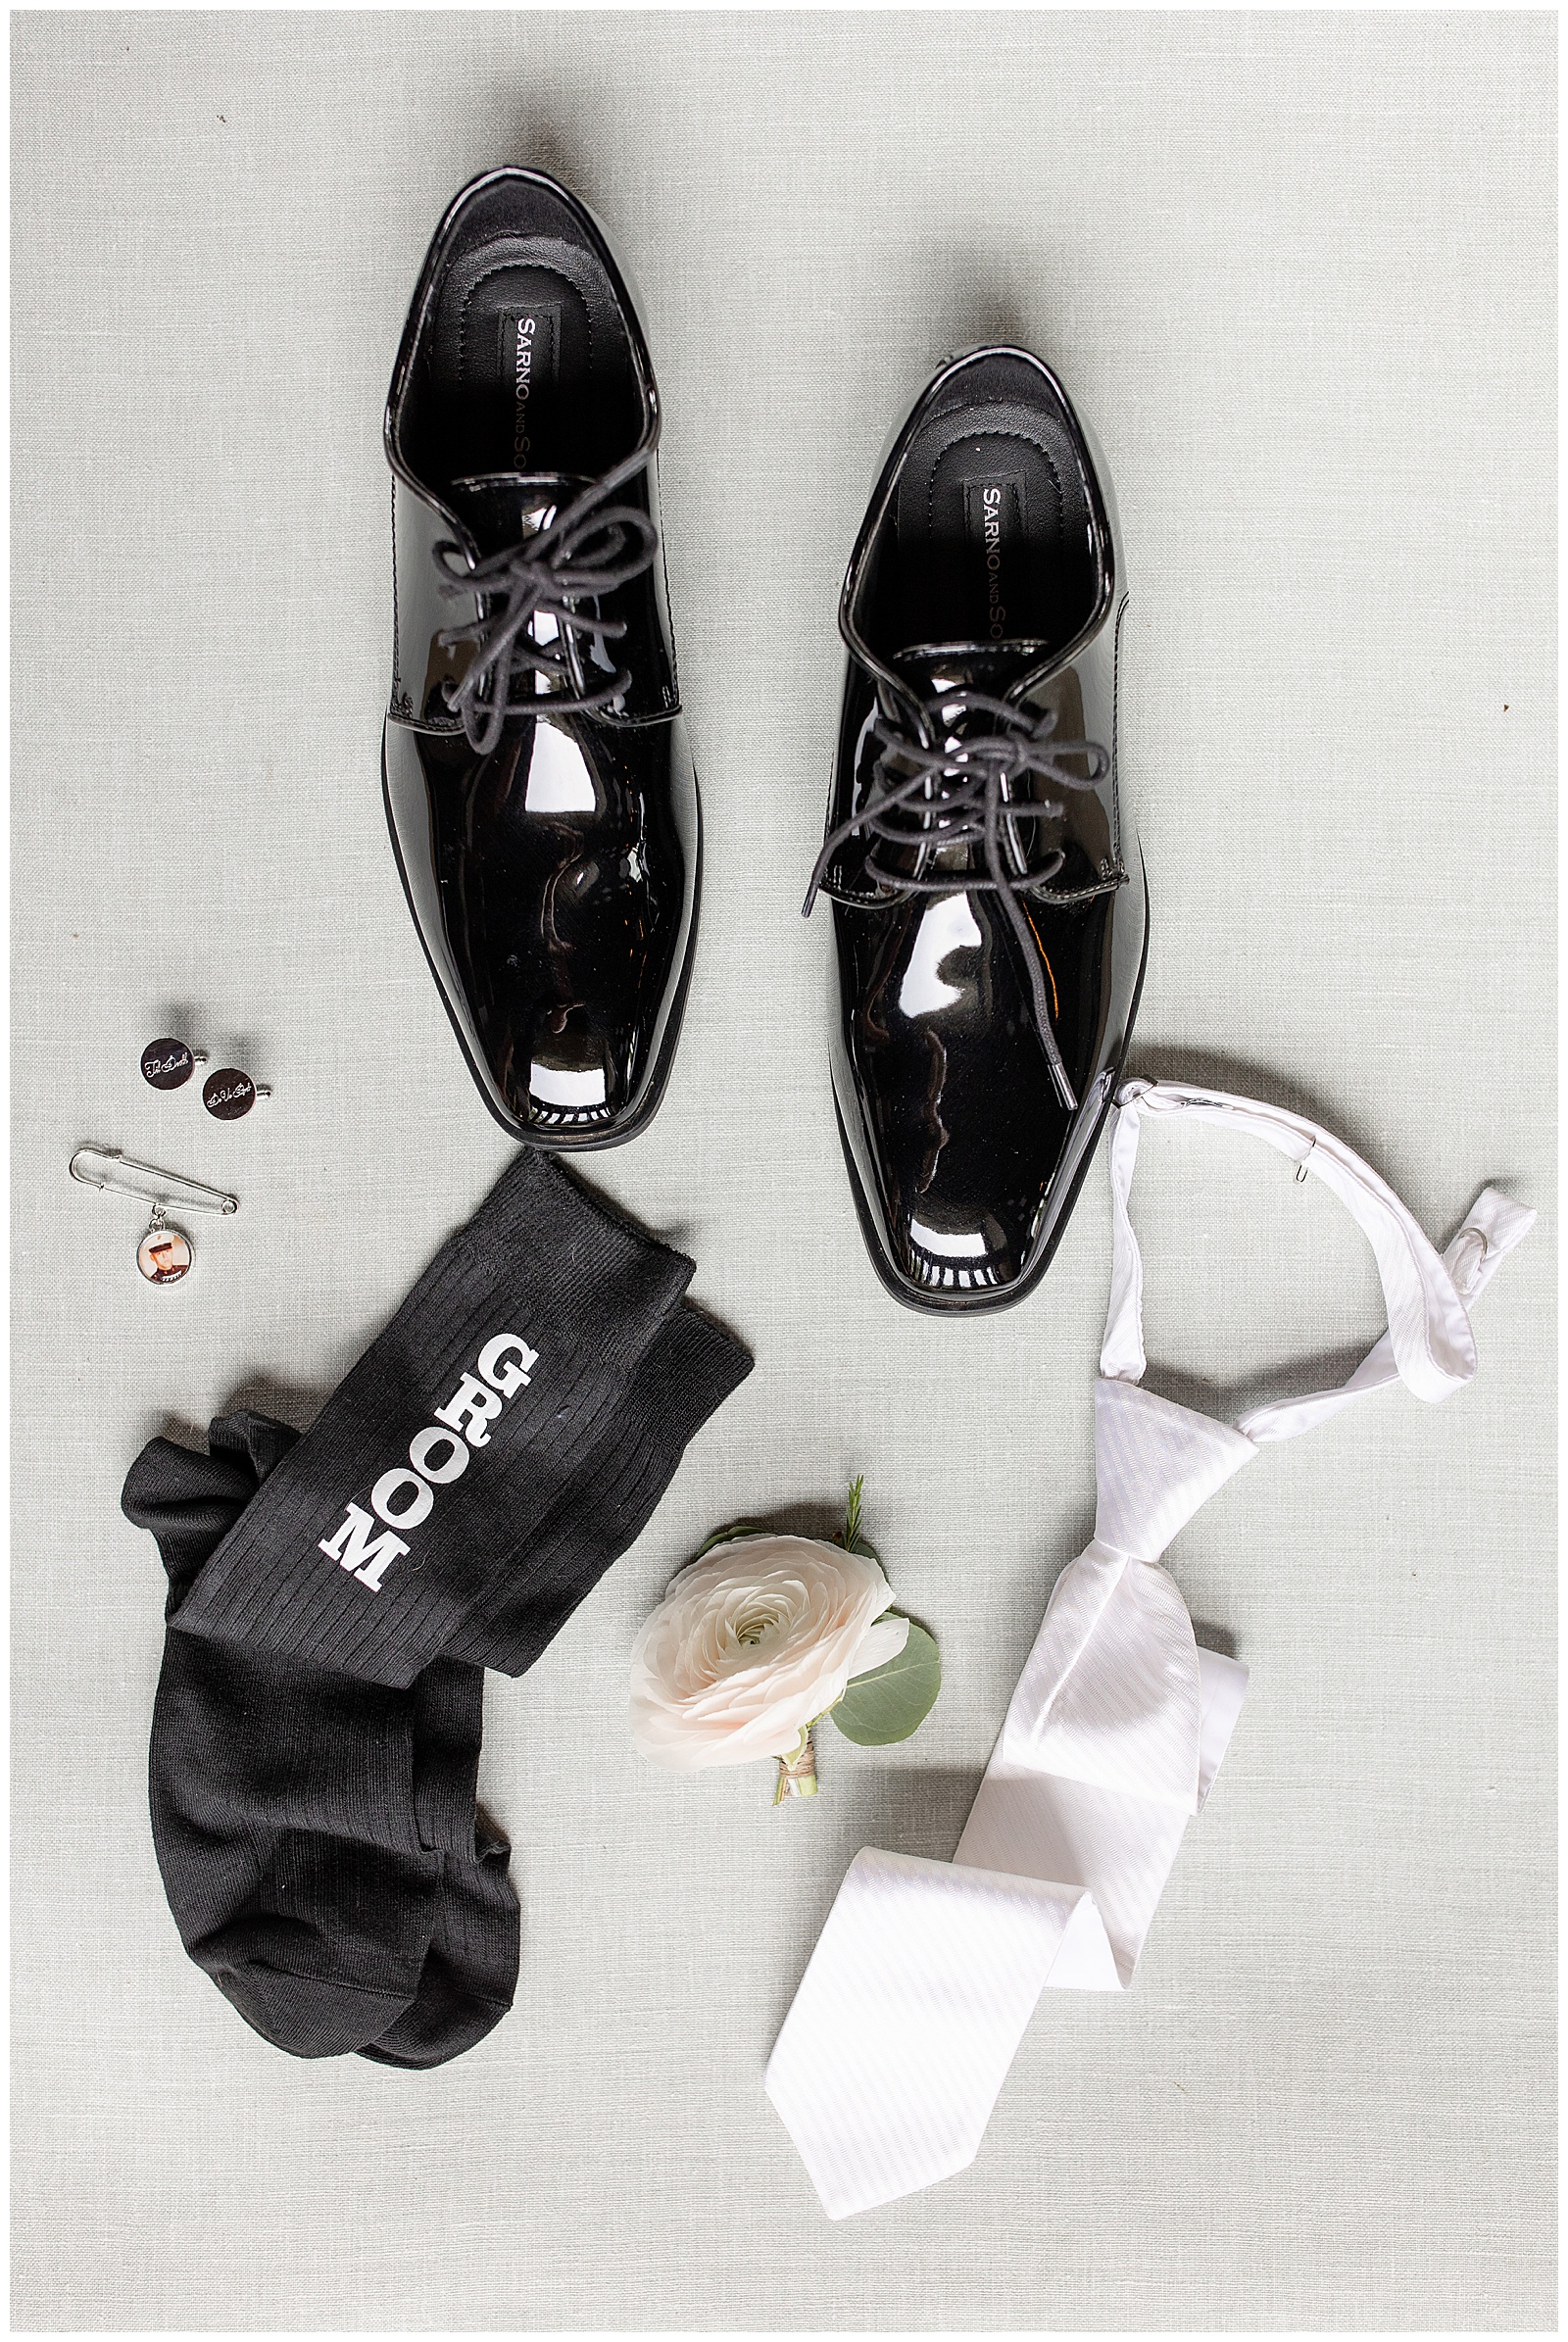 groom's shiny back shoes, white tie, and accessories displayed on white background at stoltzfus homestead